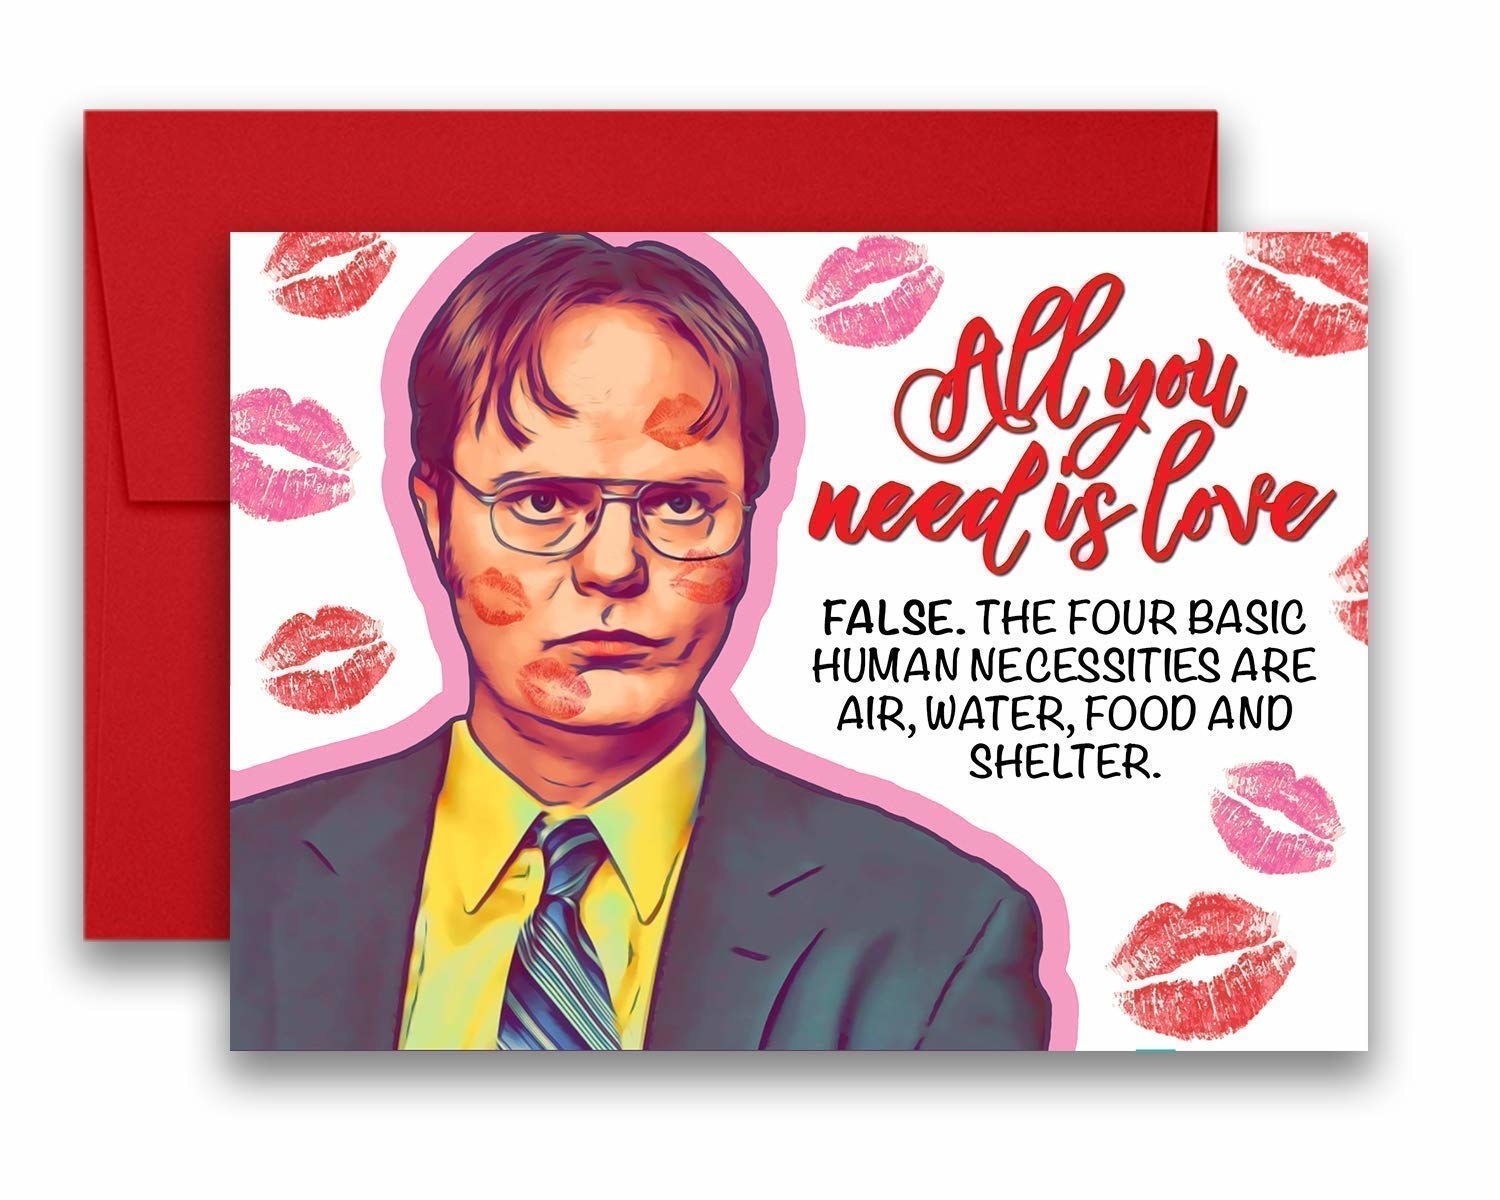 A drawing of Dwight Schrute, covered in lipstick kisses, and the words &quot;All you need is love—false, the four basic human necessities are air, water, food and shelter&quot;